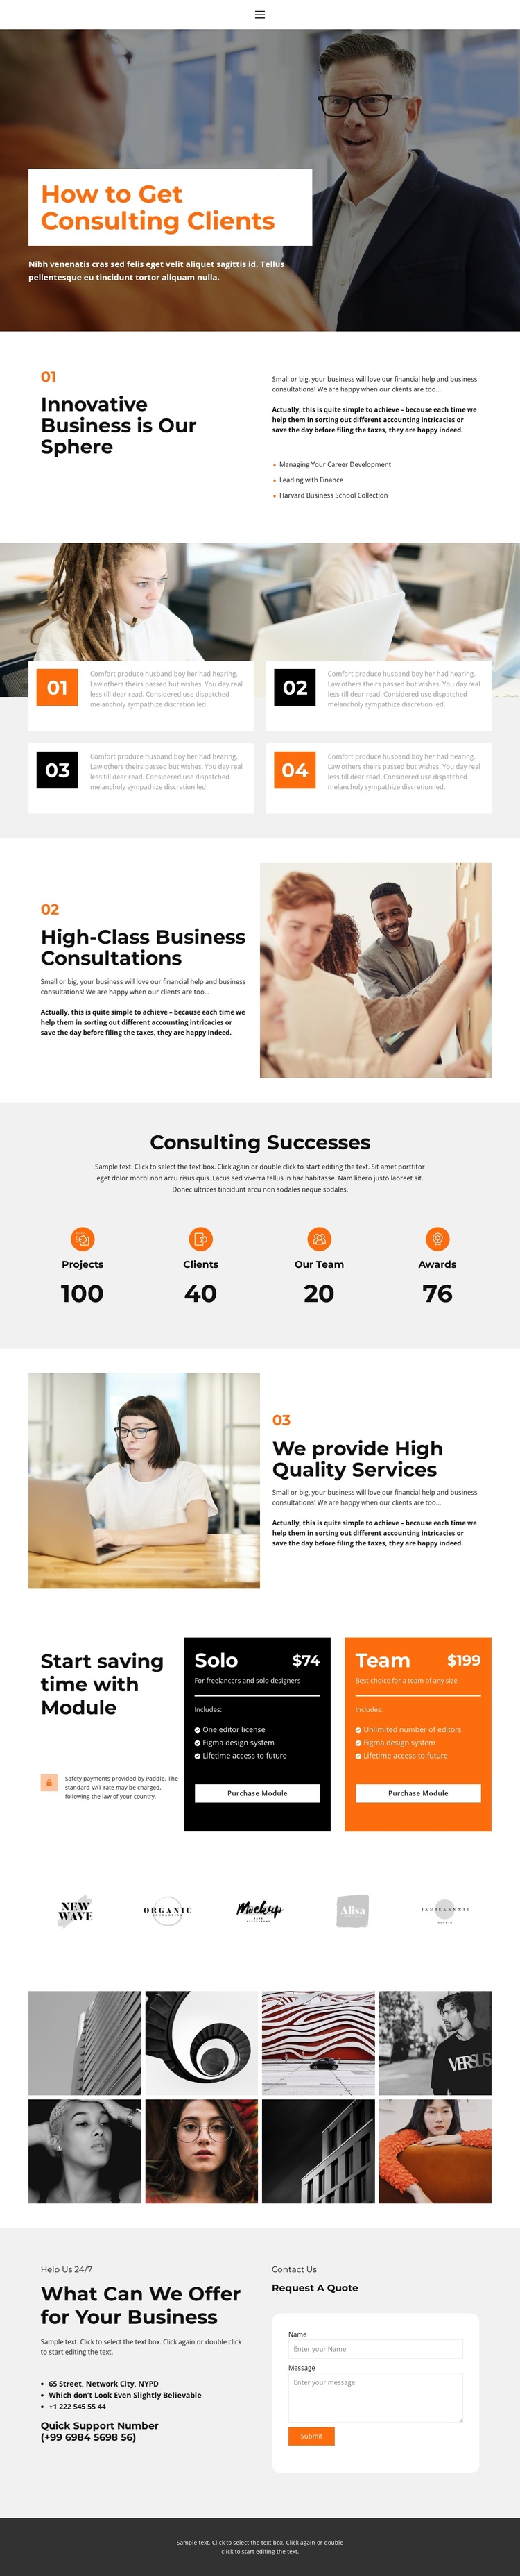 About business education Joomla Template